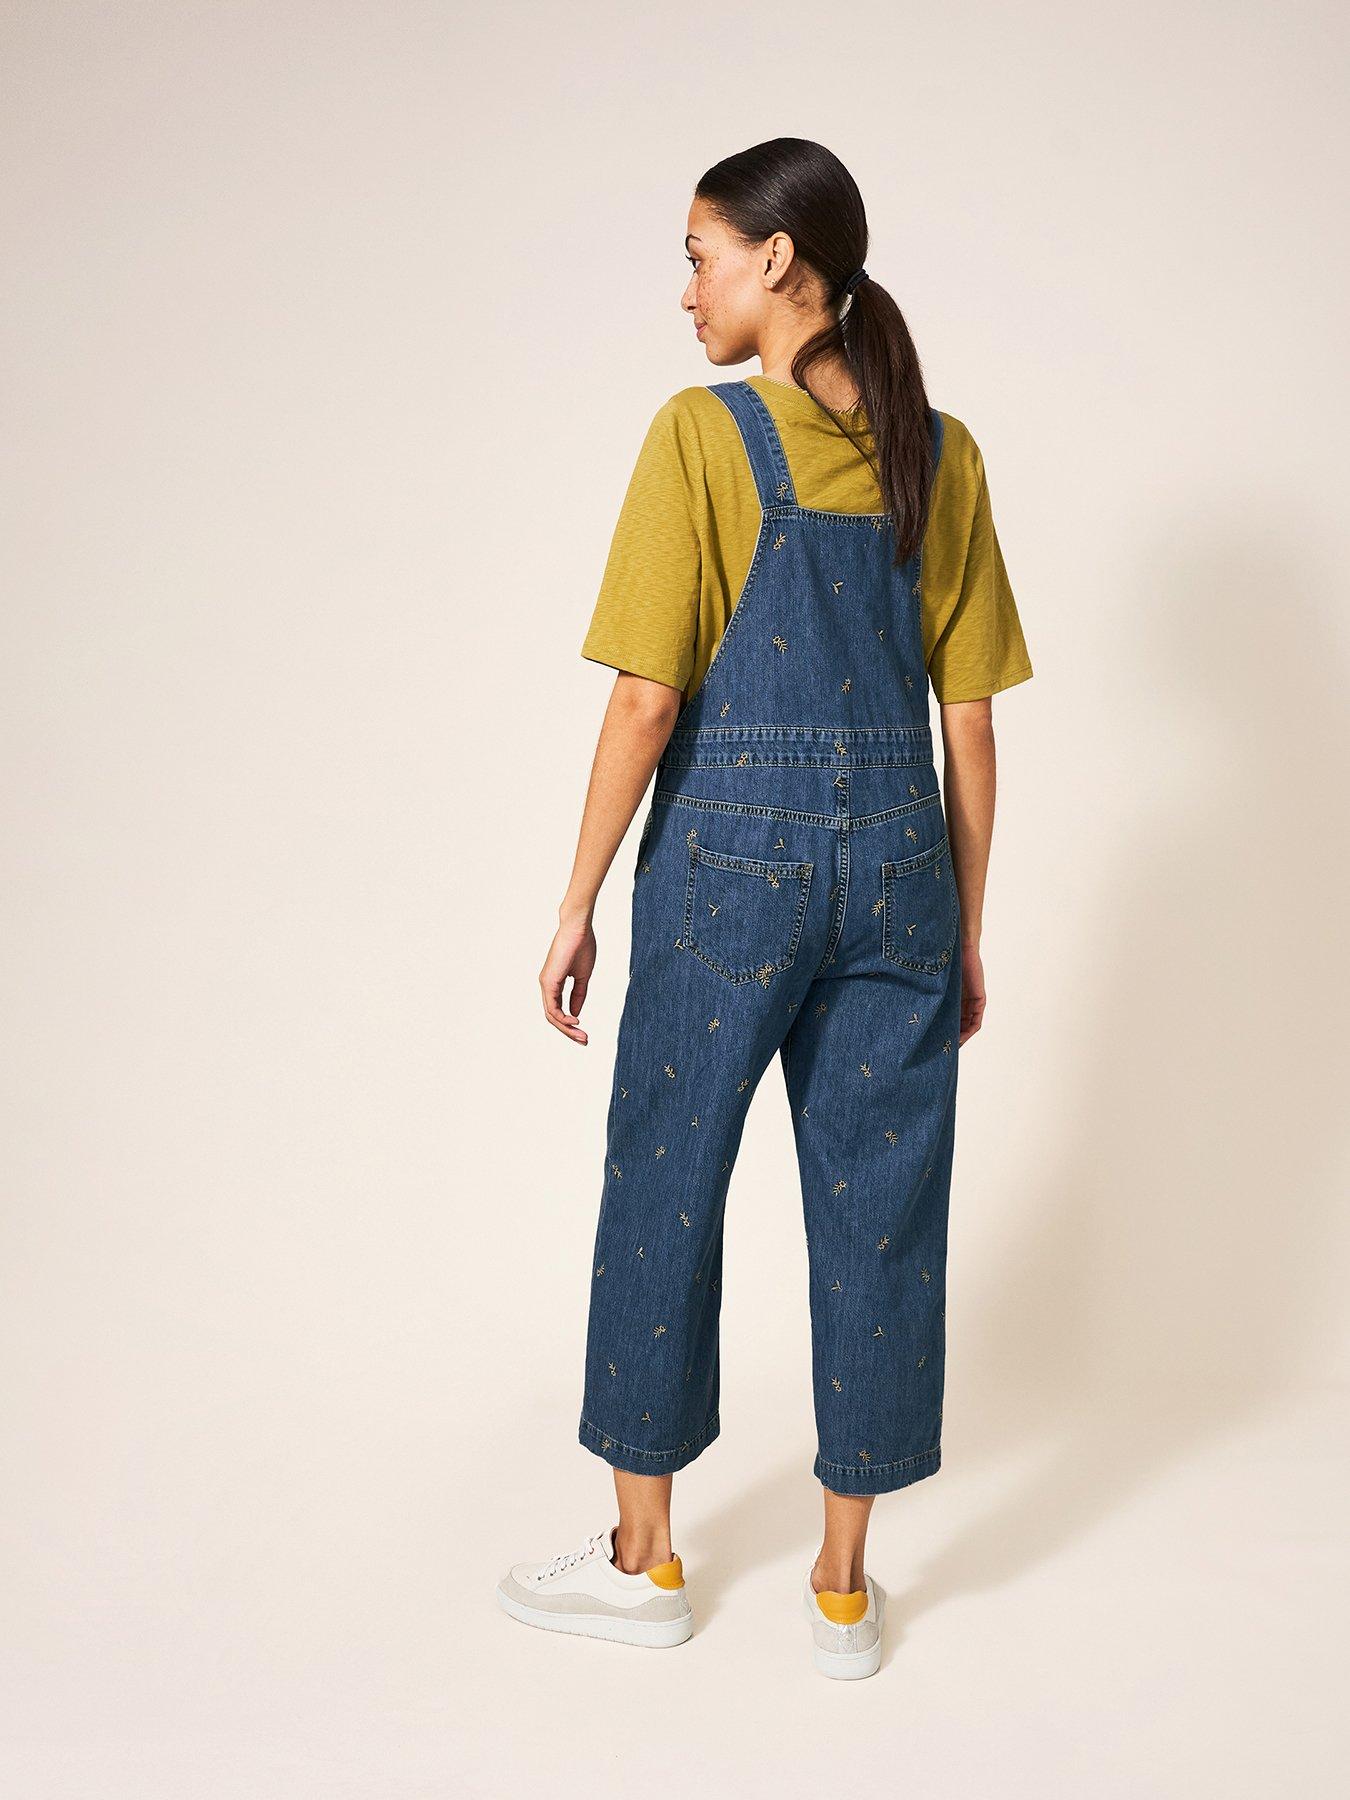 White Stuff Embroidered Crop Dungaree - Blue